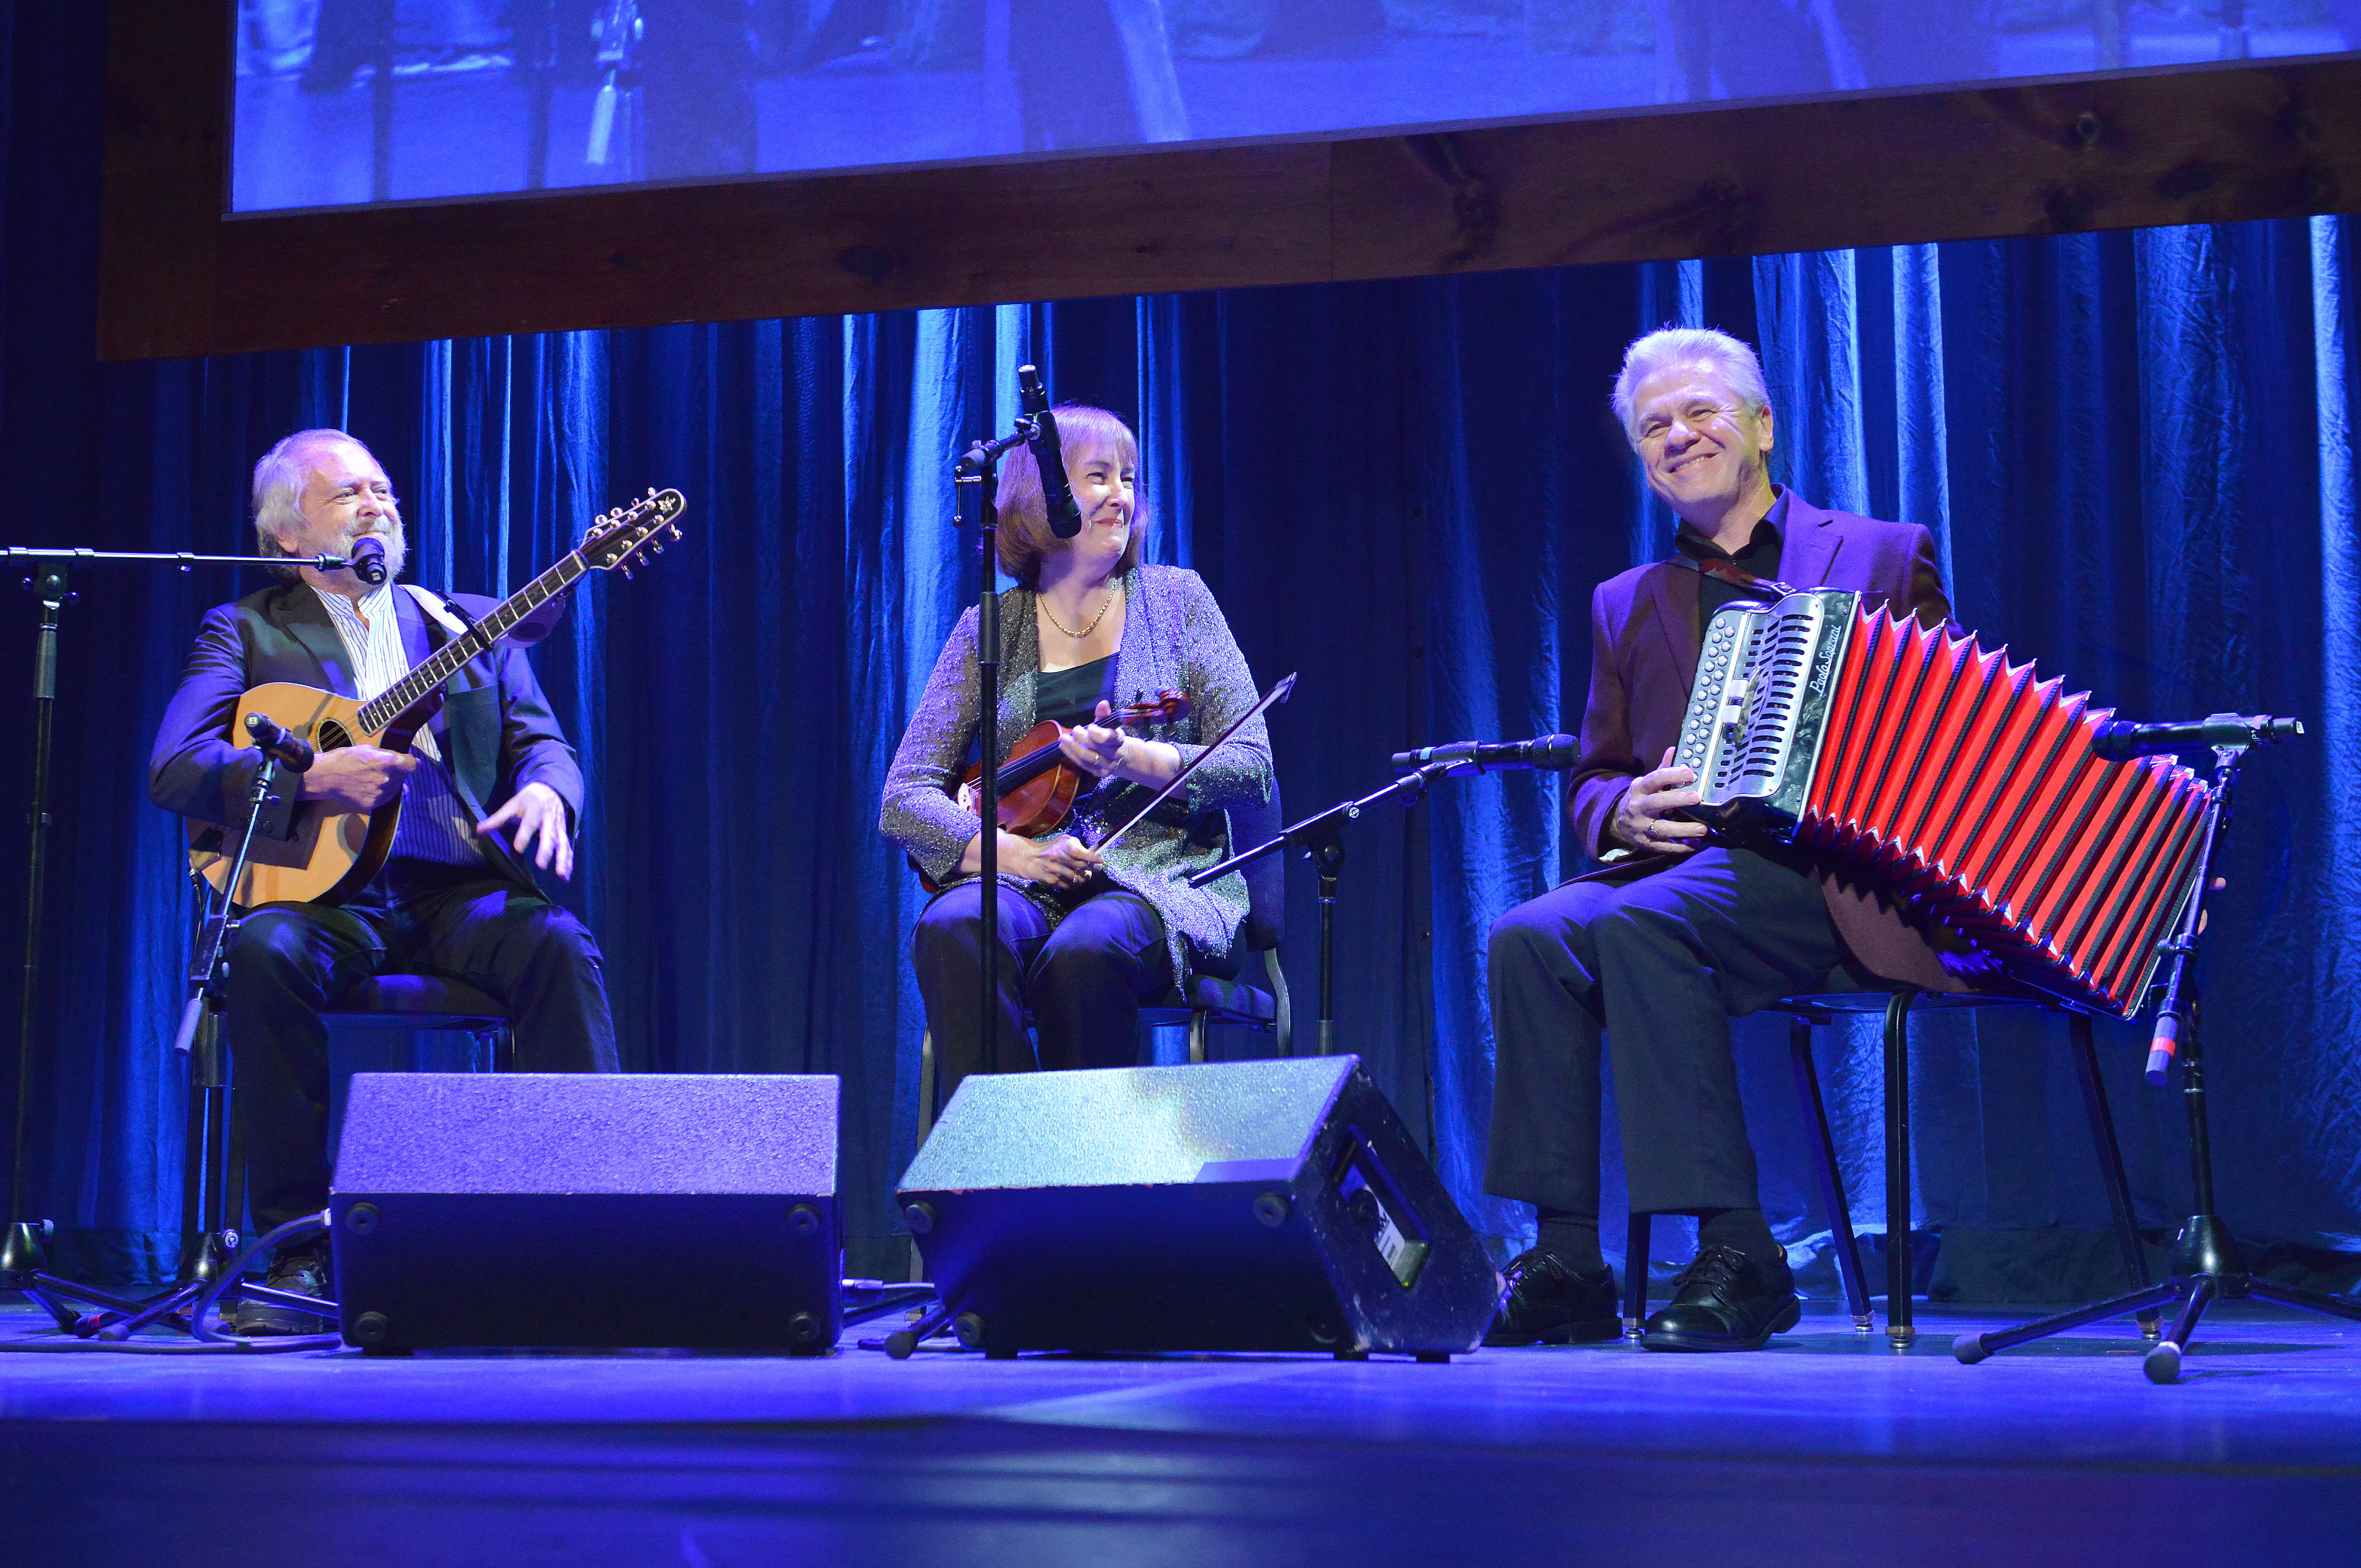 Three fellows sitting together on stage with instruments in their hands and playing music.